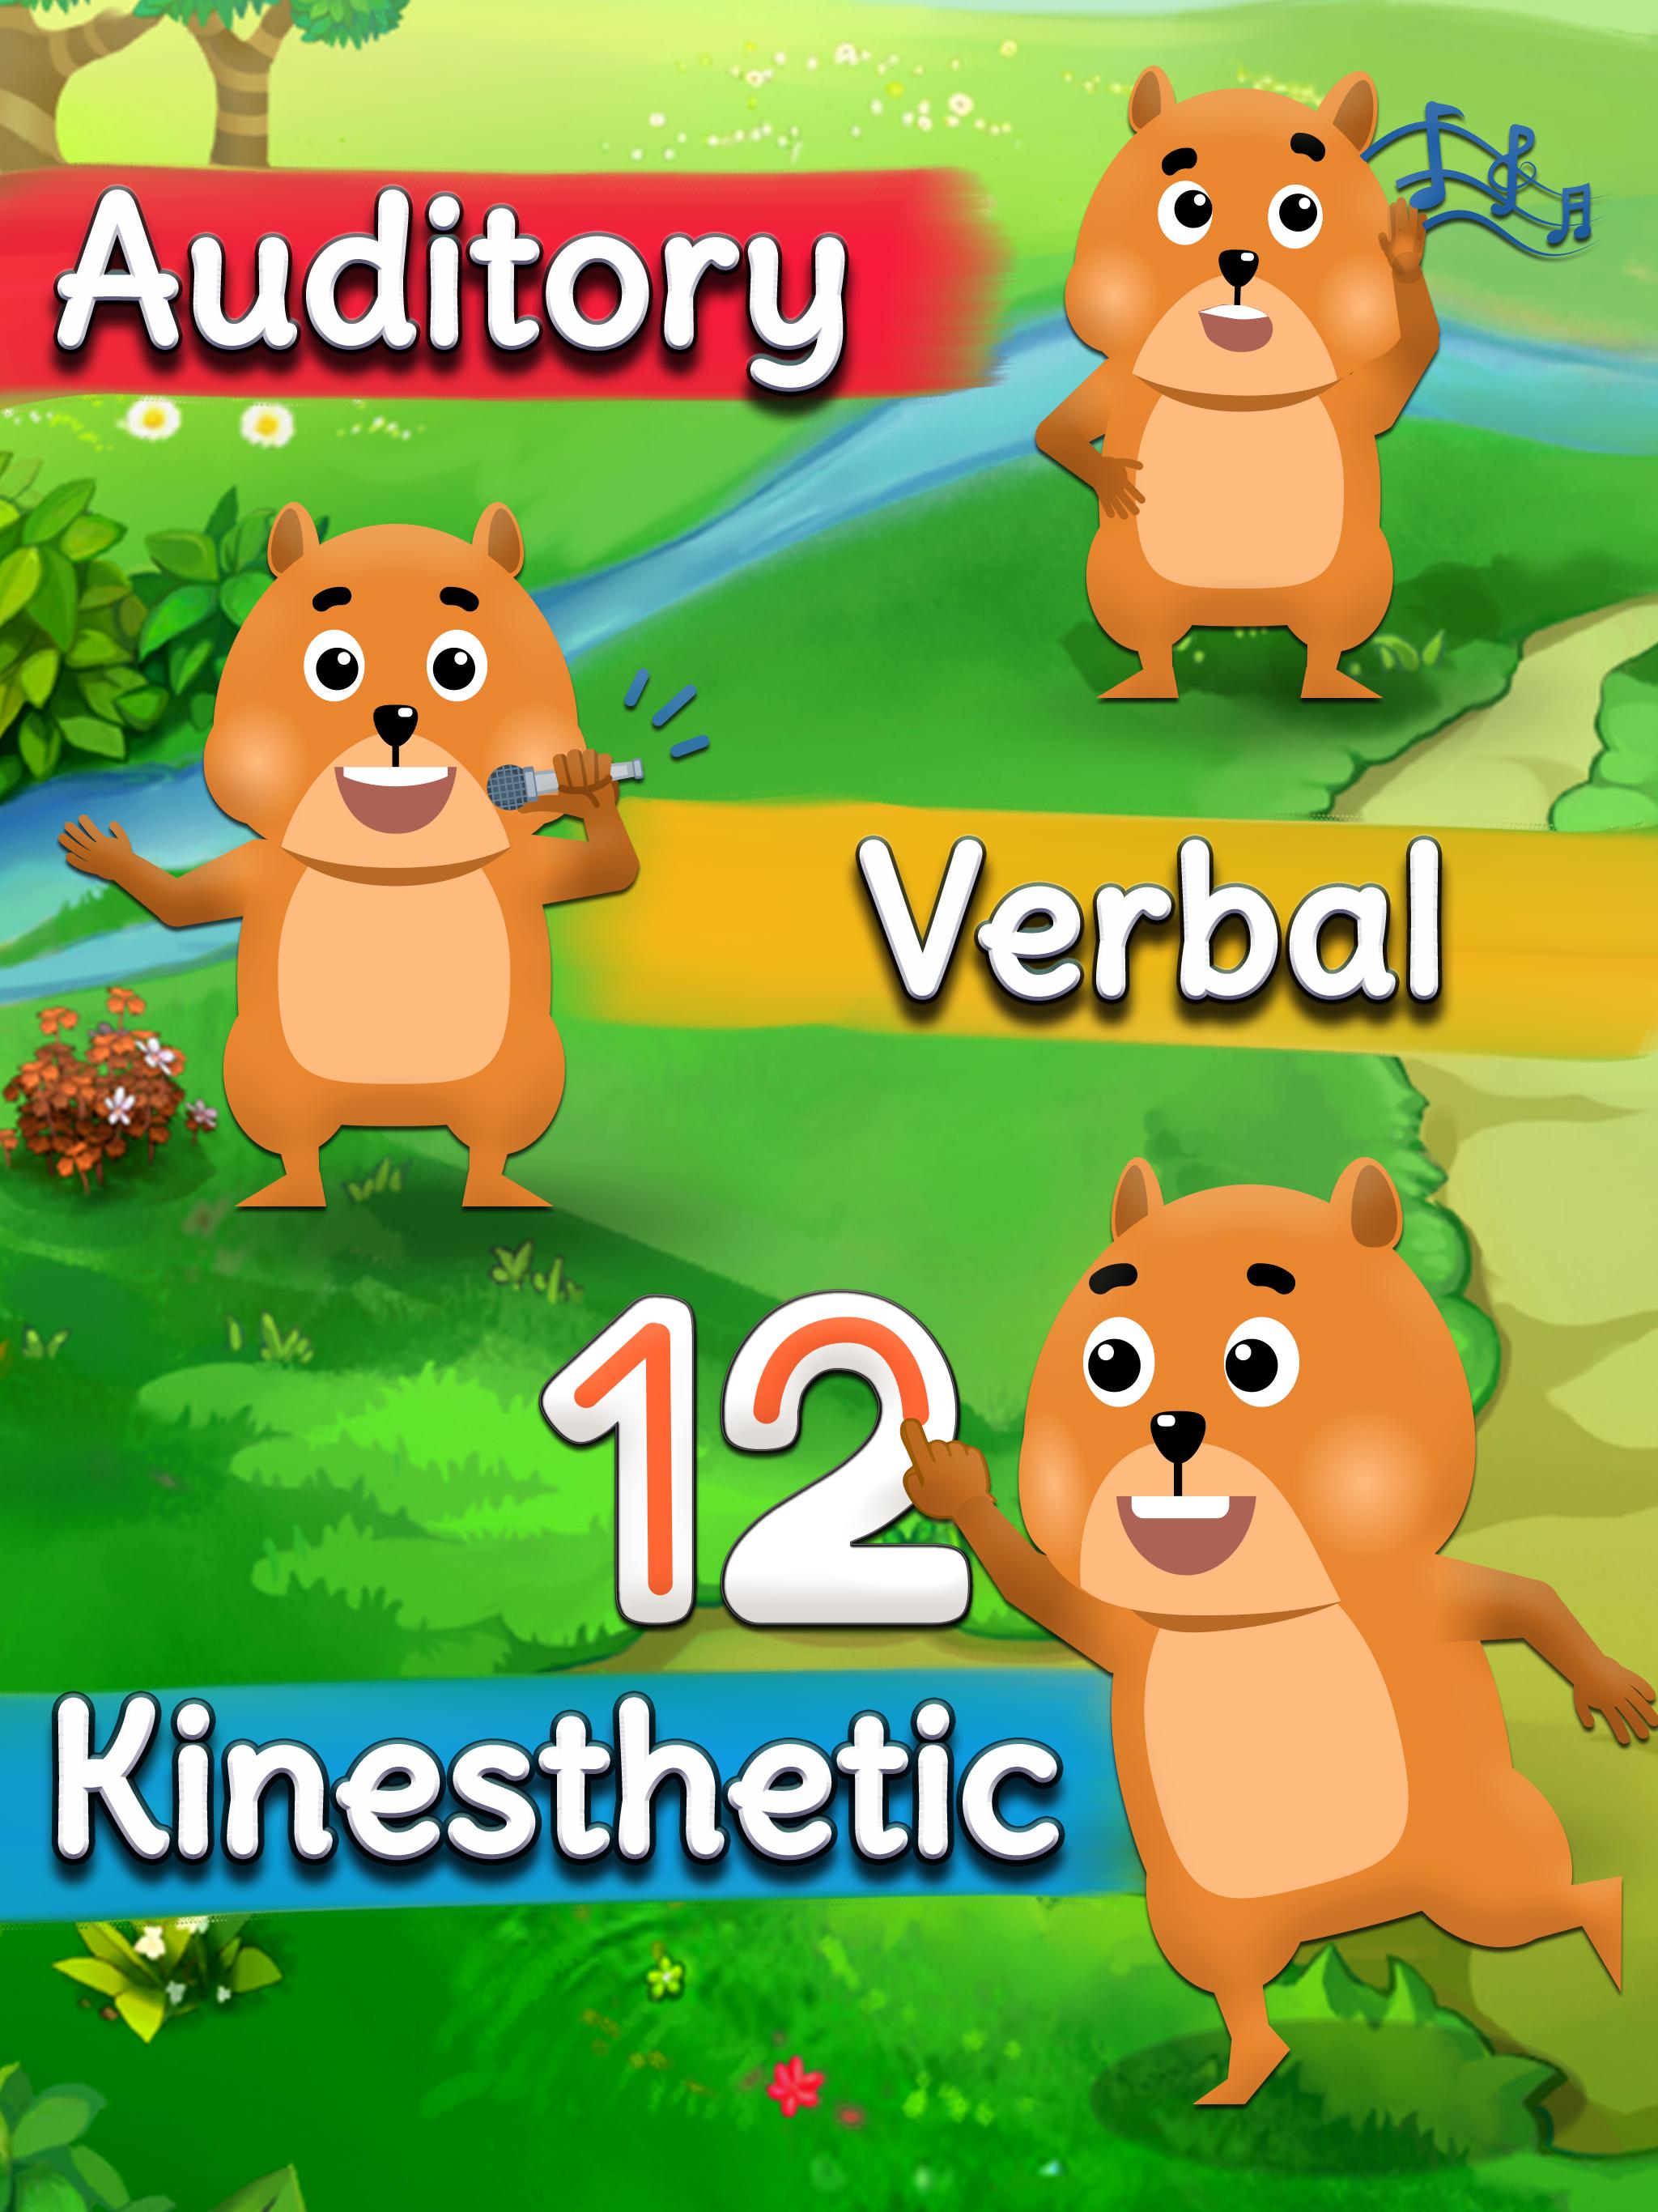 Times Tables & Friends: Free Multiplication Games 2.3.77 Screenshot 22